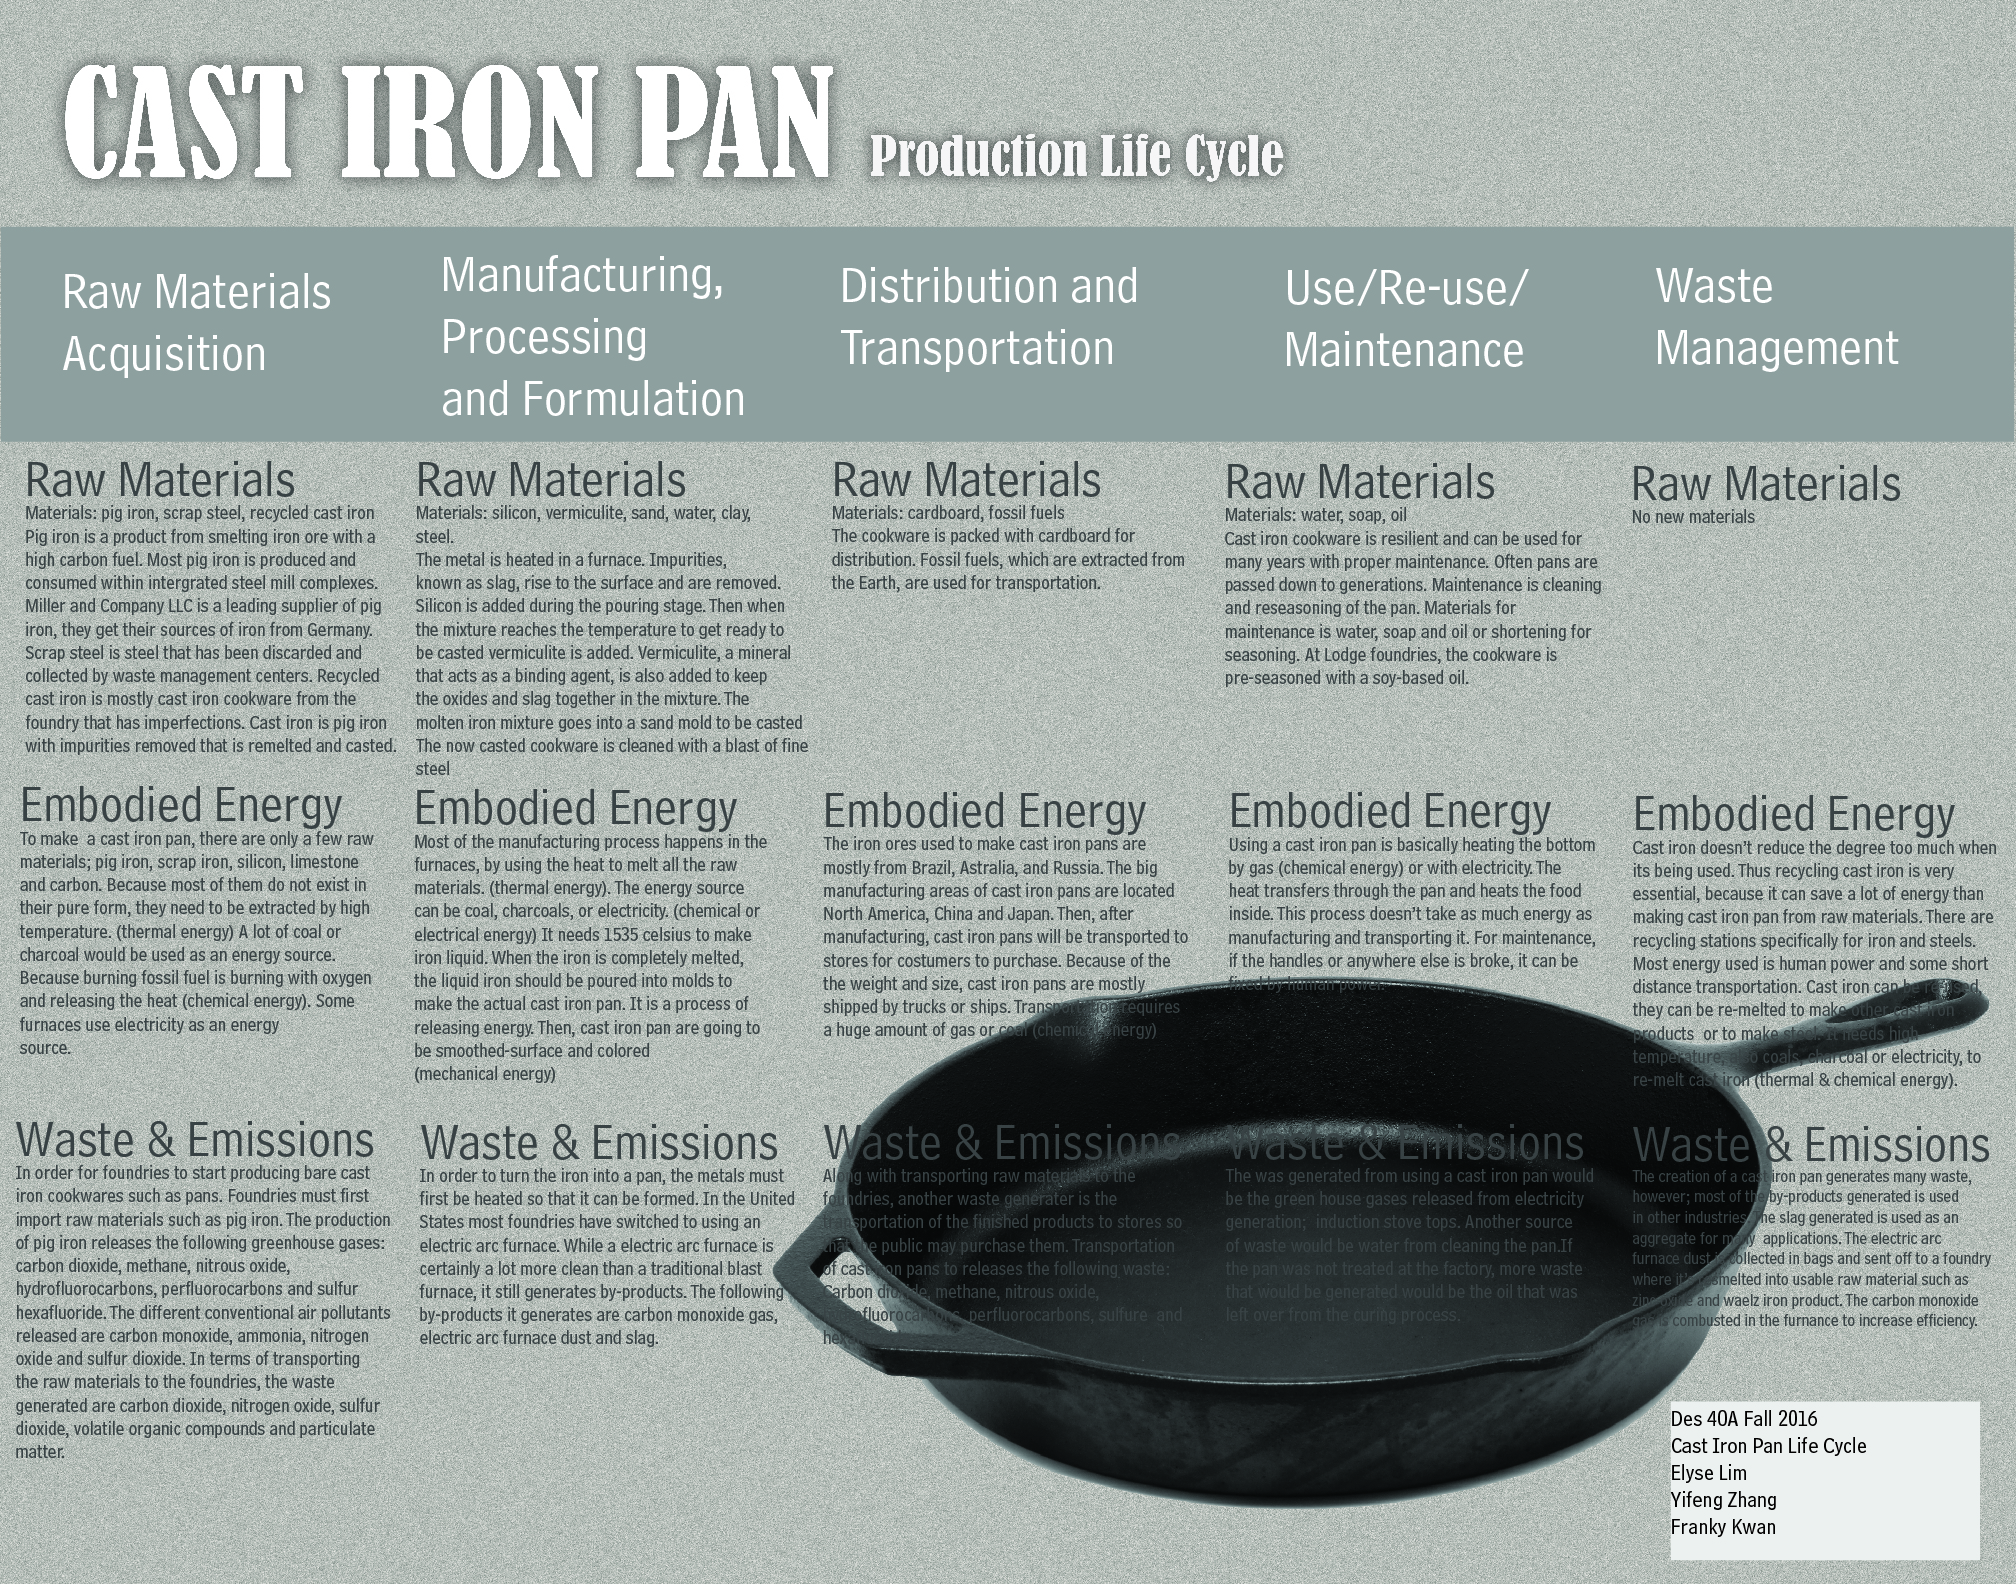 Teflon and steel are out. Indian are switching back to cast iron and  earthen cookware.